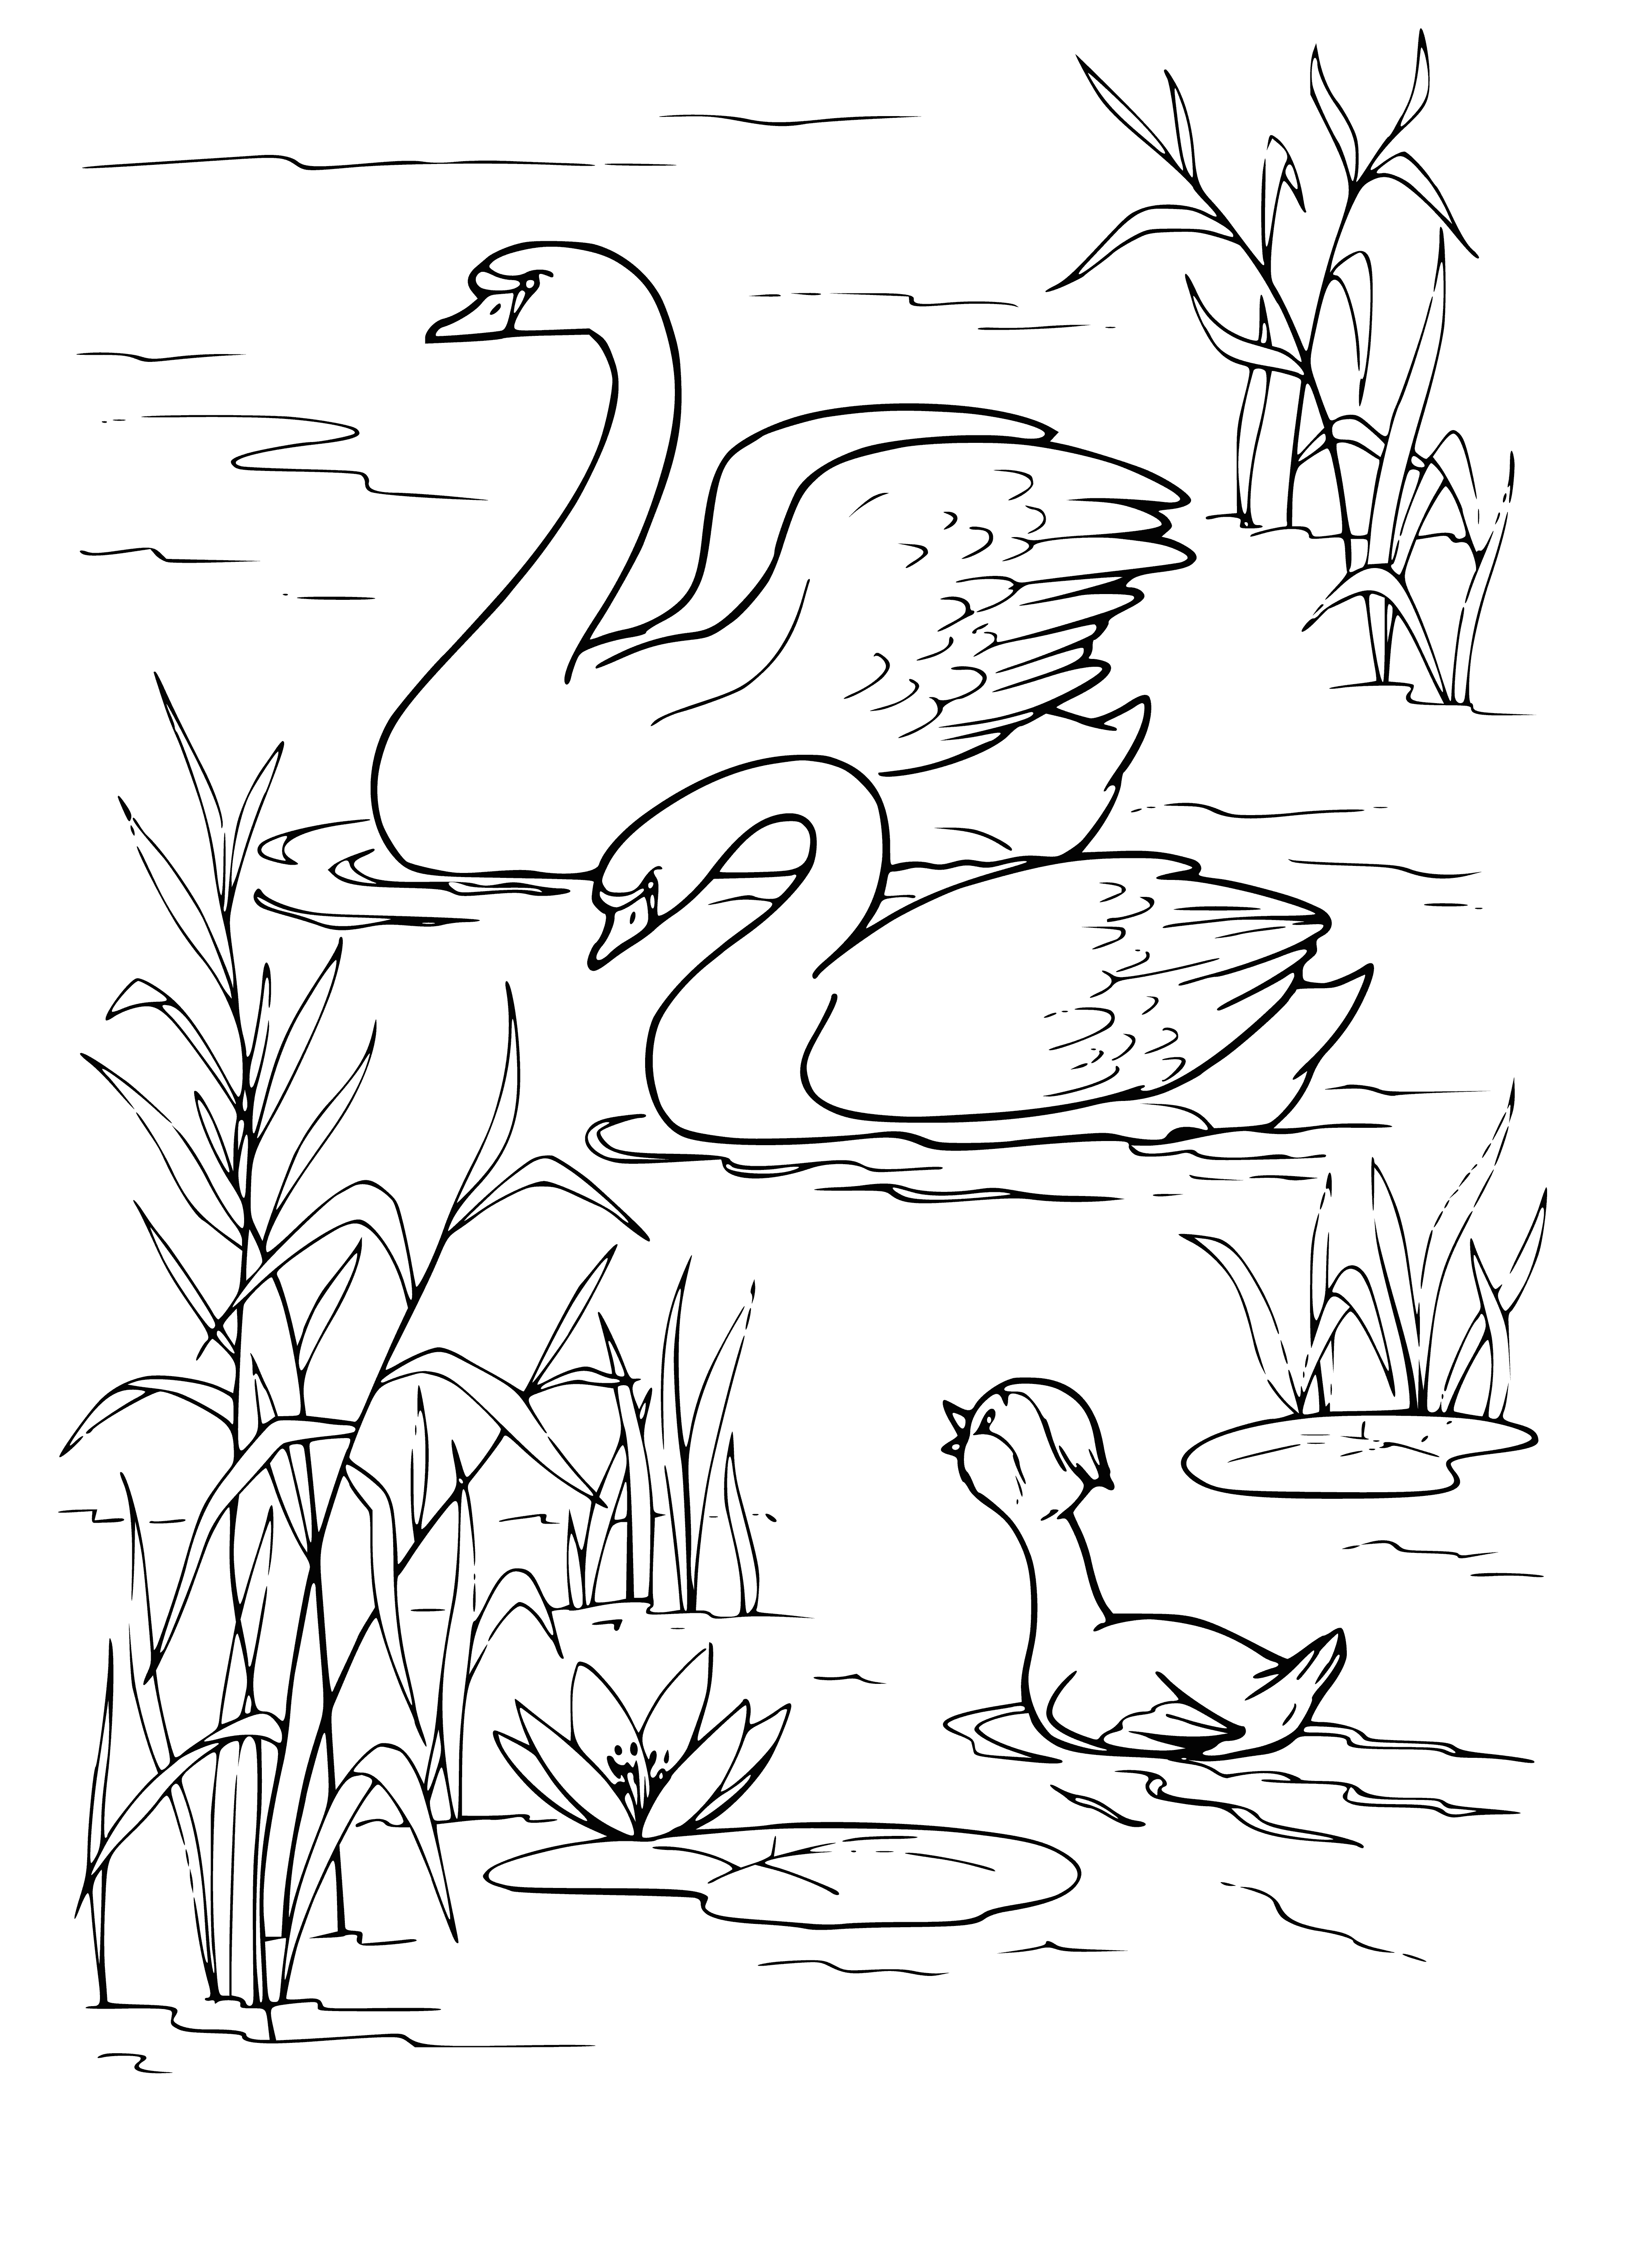 coloring page: It makes him think of himself as ugly and insignificant.

A duckling is awestruck by swans and thinks he's ugly and insignificant in comparison.